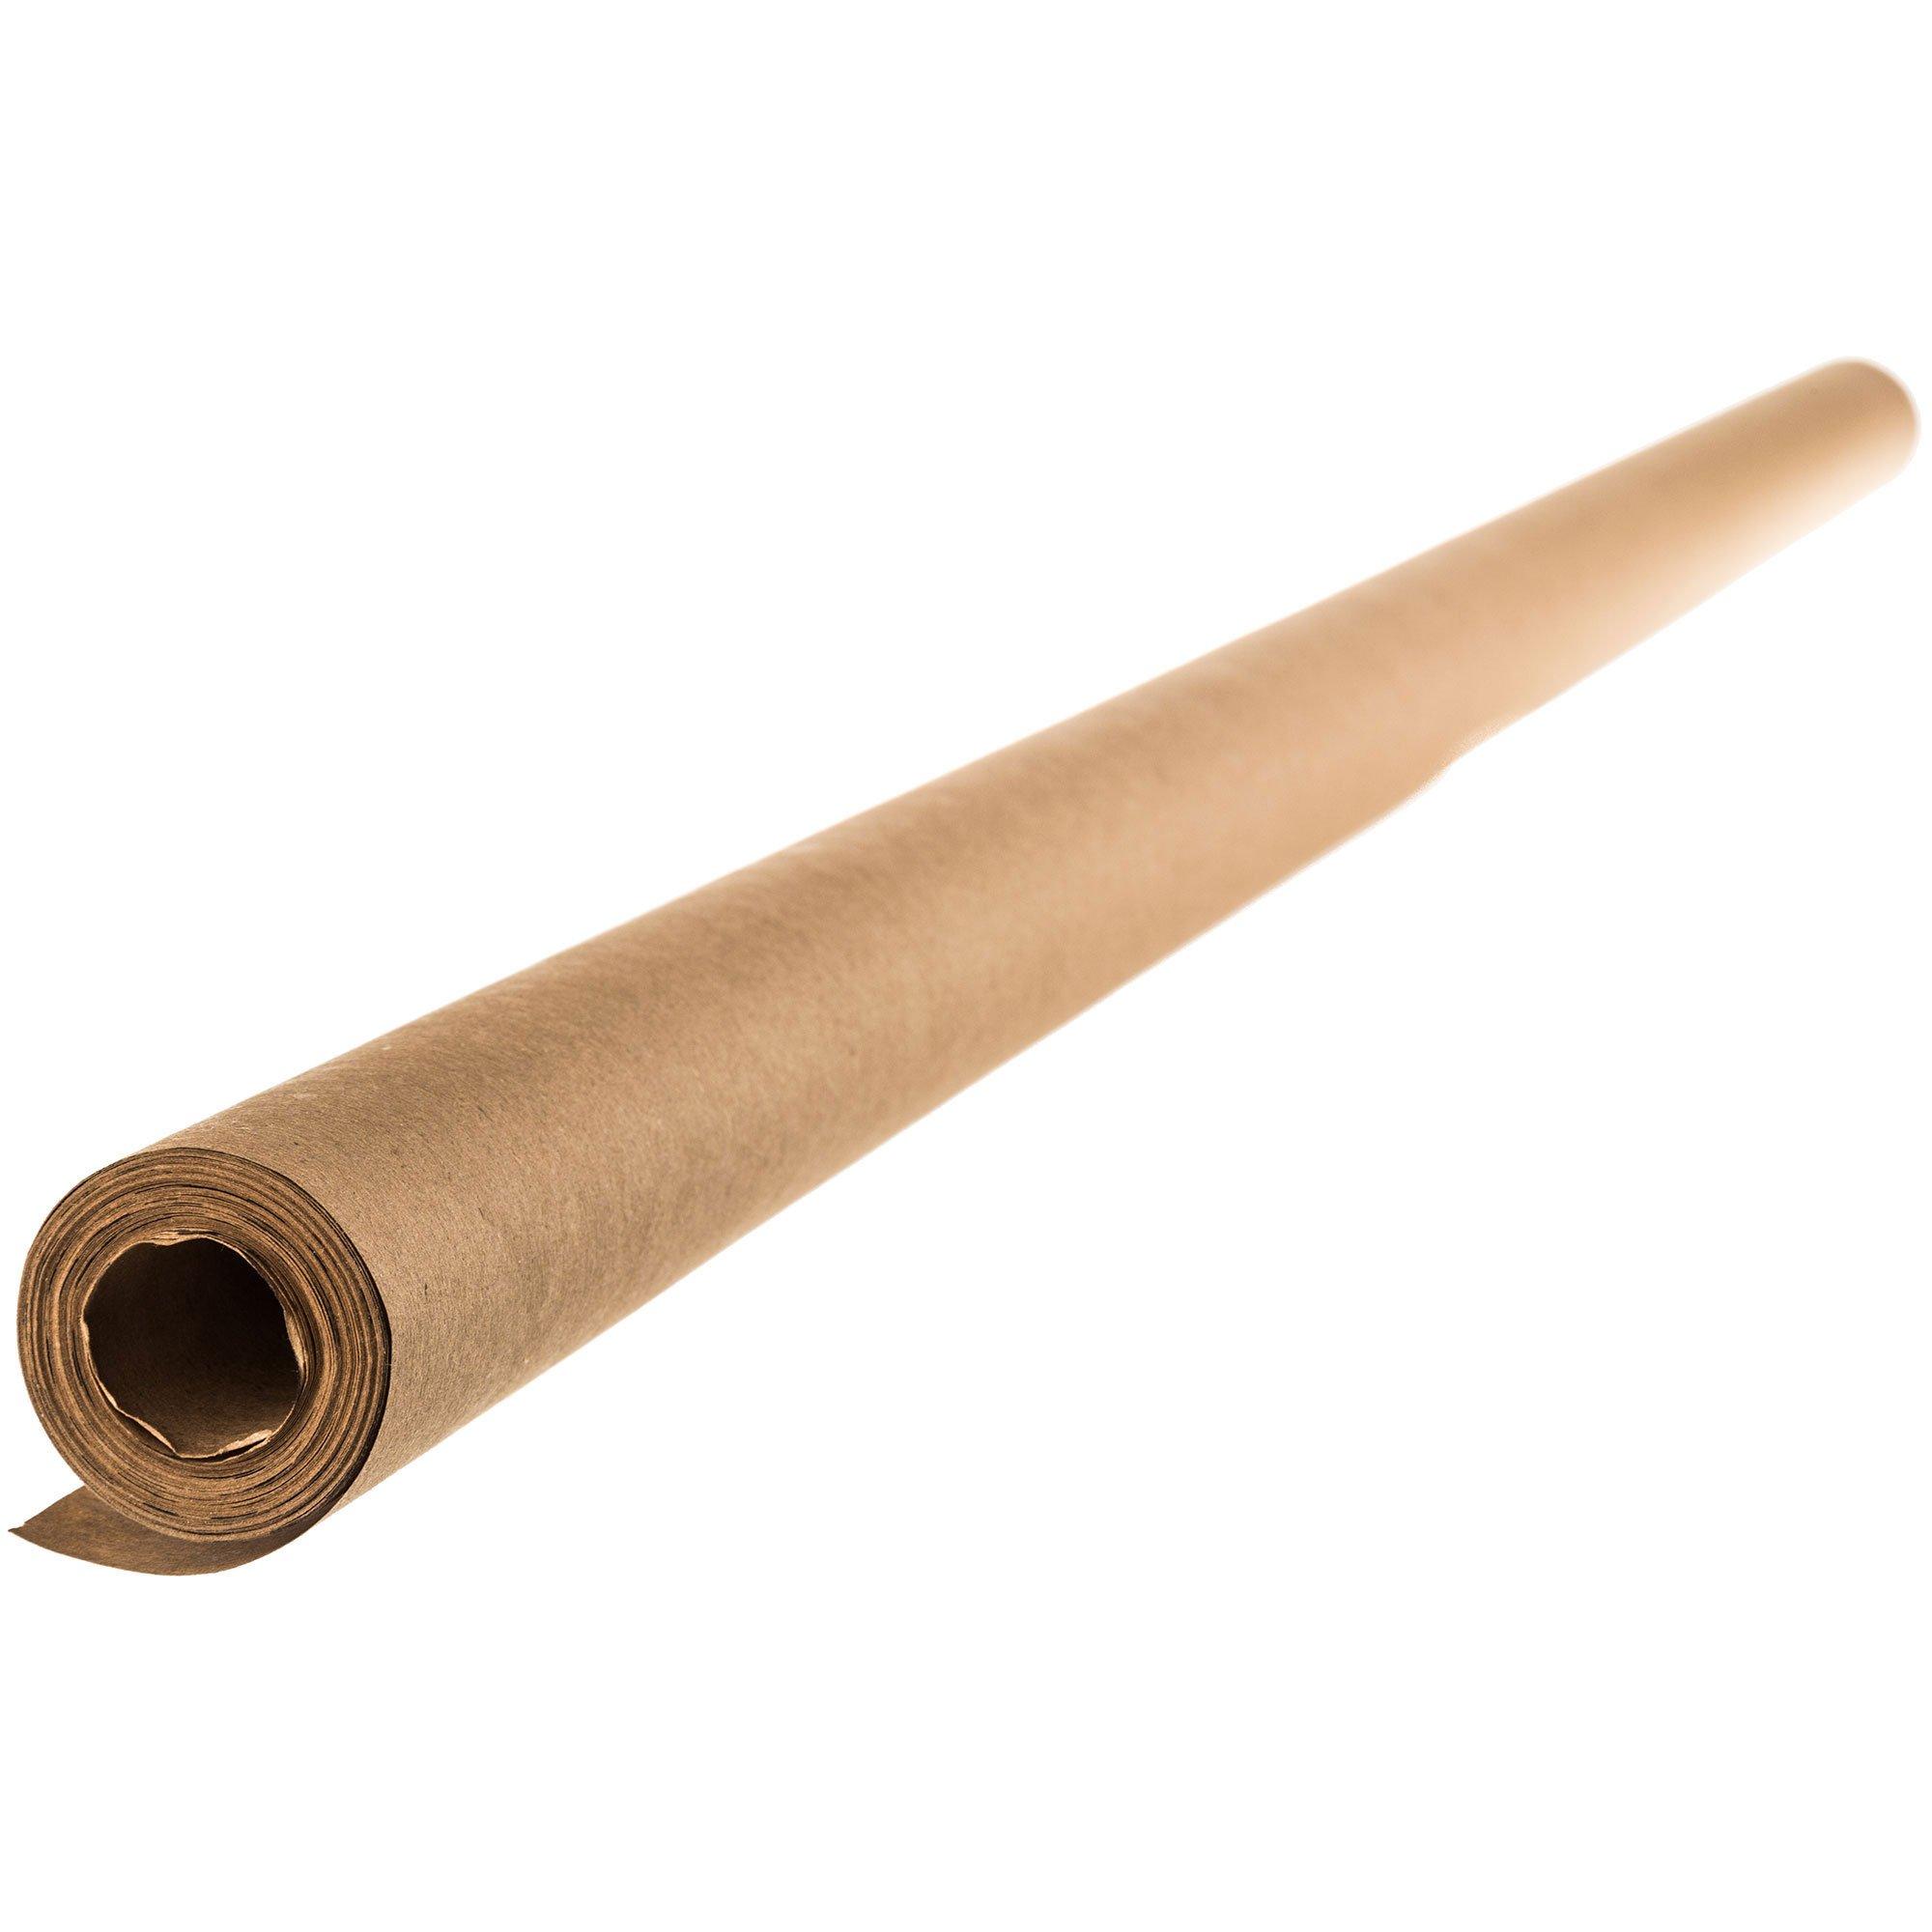 White Kraft Paper Roll - 36 inch x 100 Feet - Recycled Paper